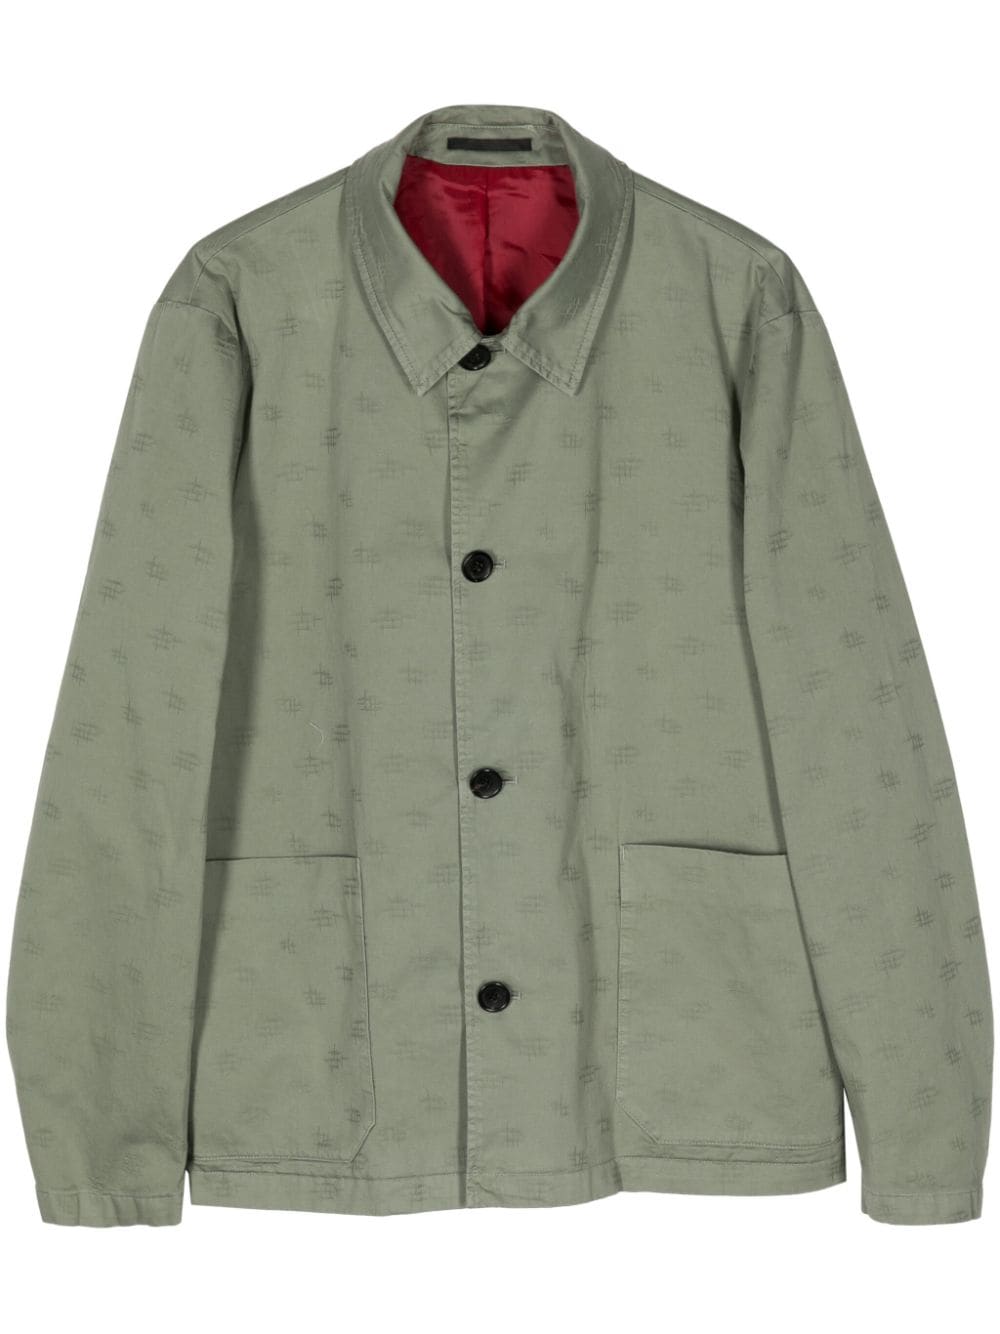 PS Paul Smith patterned-jacquard cotton shirt jacket - Green von PS Paul Smith